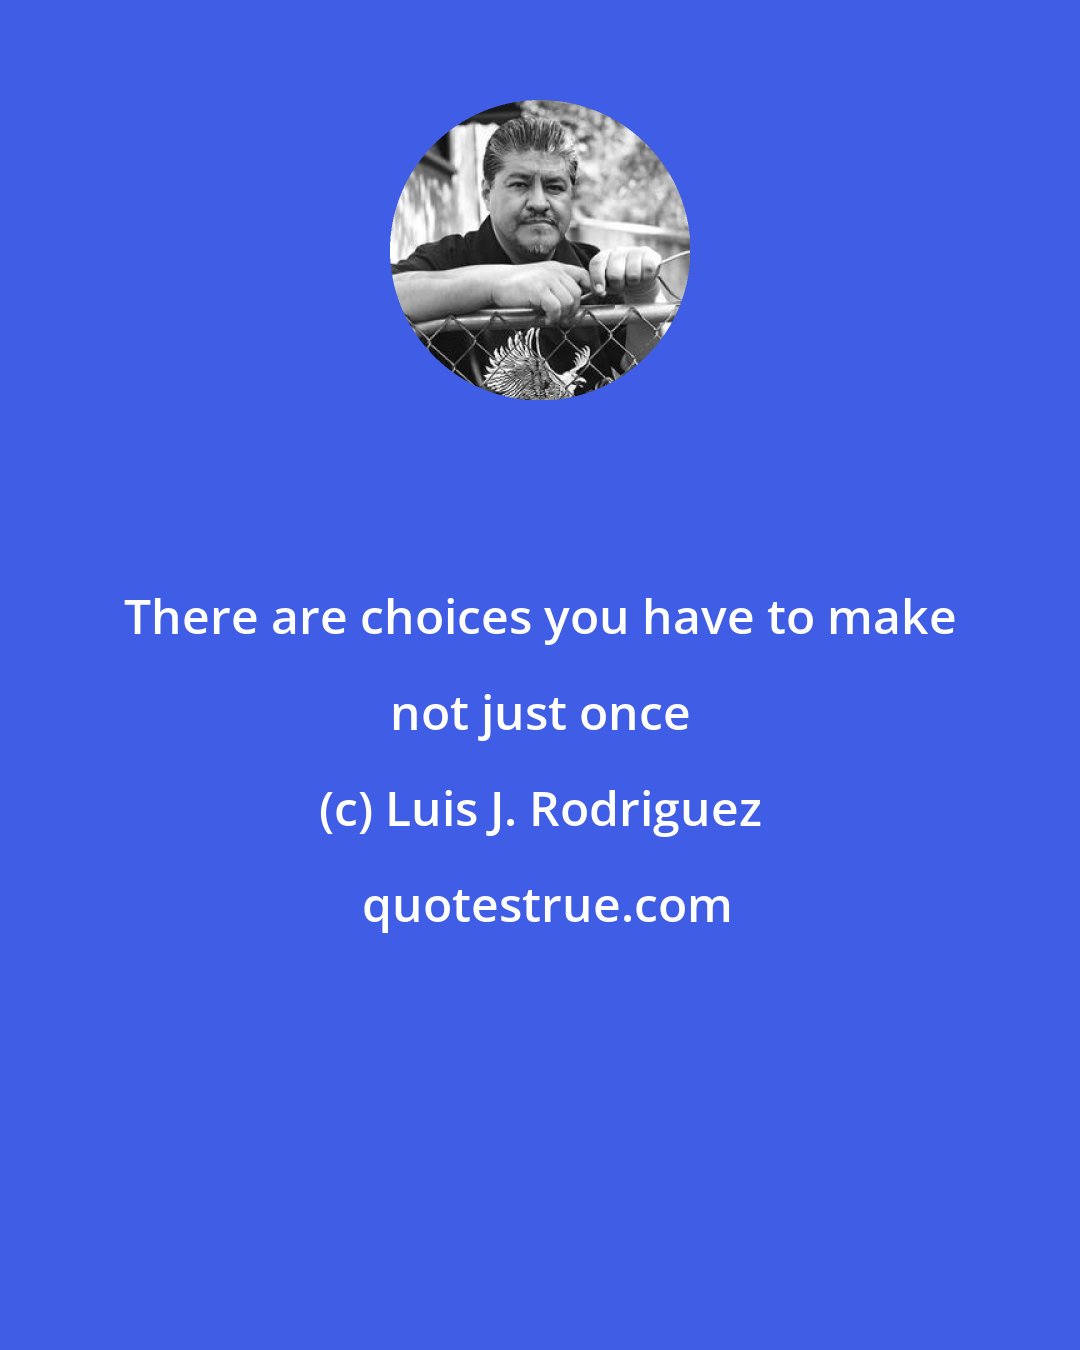 Luis J. Rodriguez: There are choices you have to make not just once